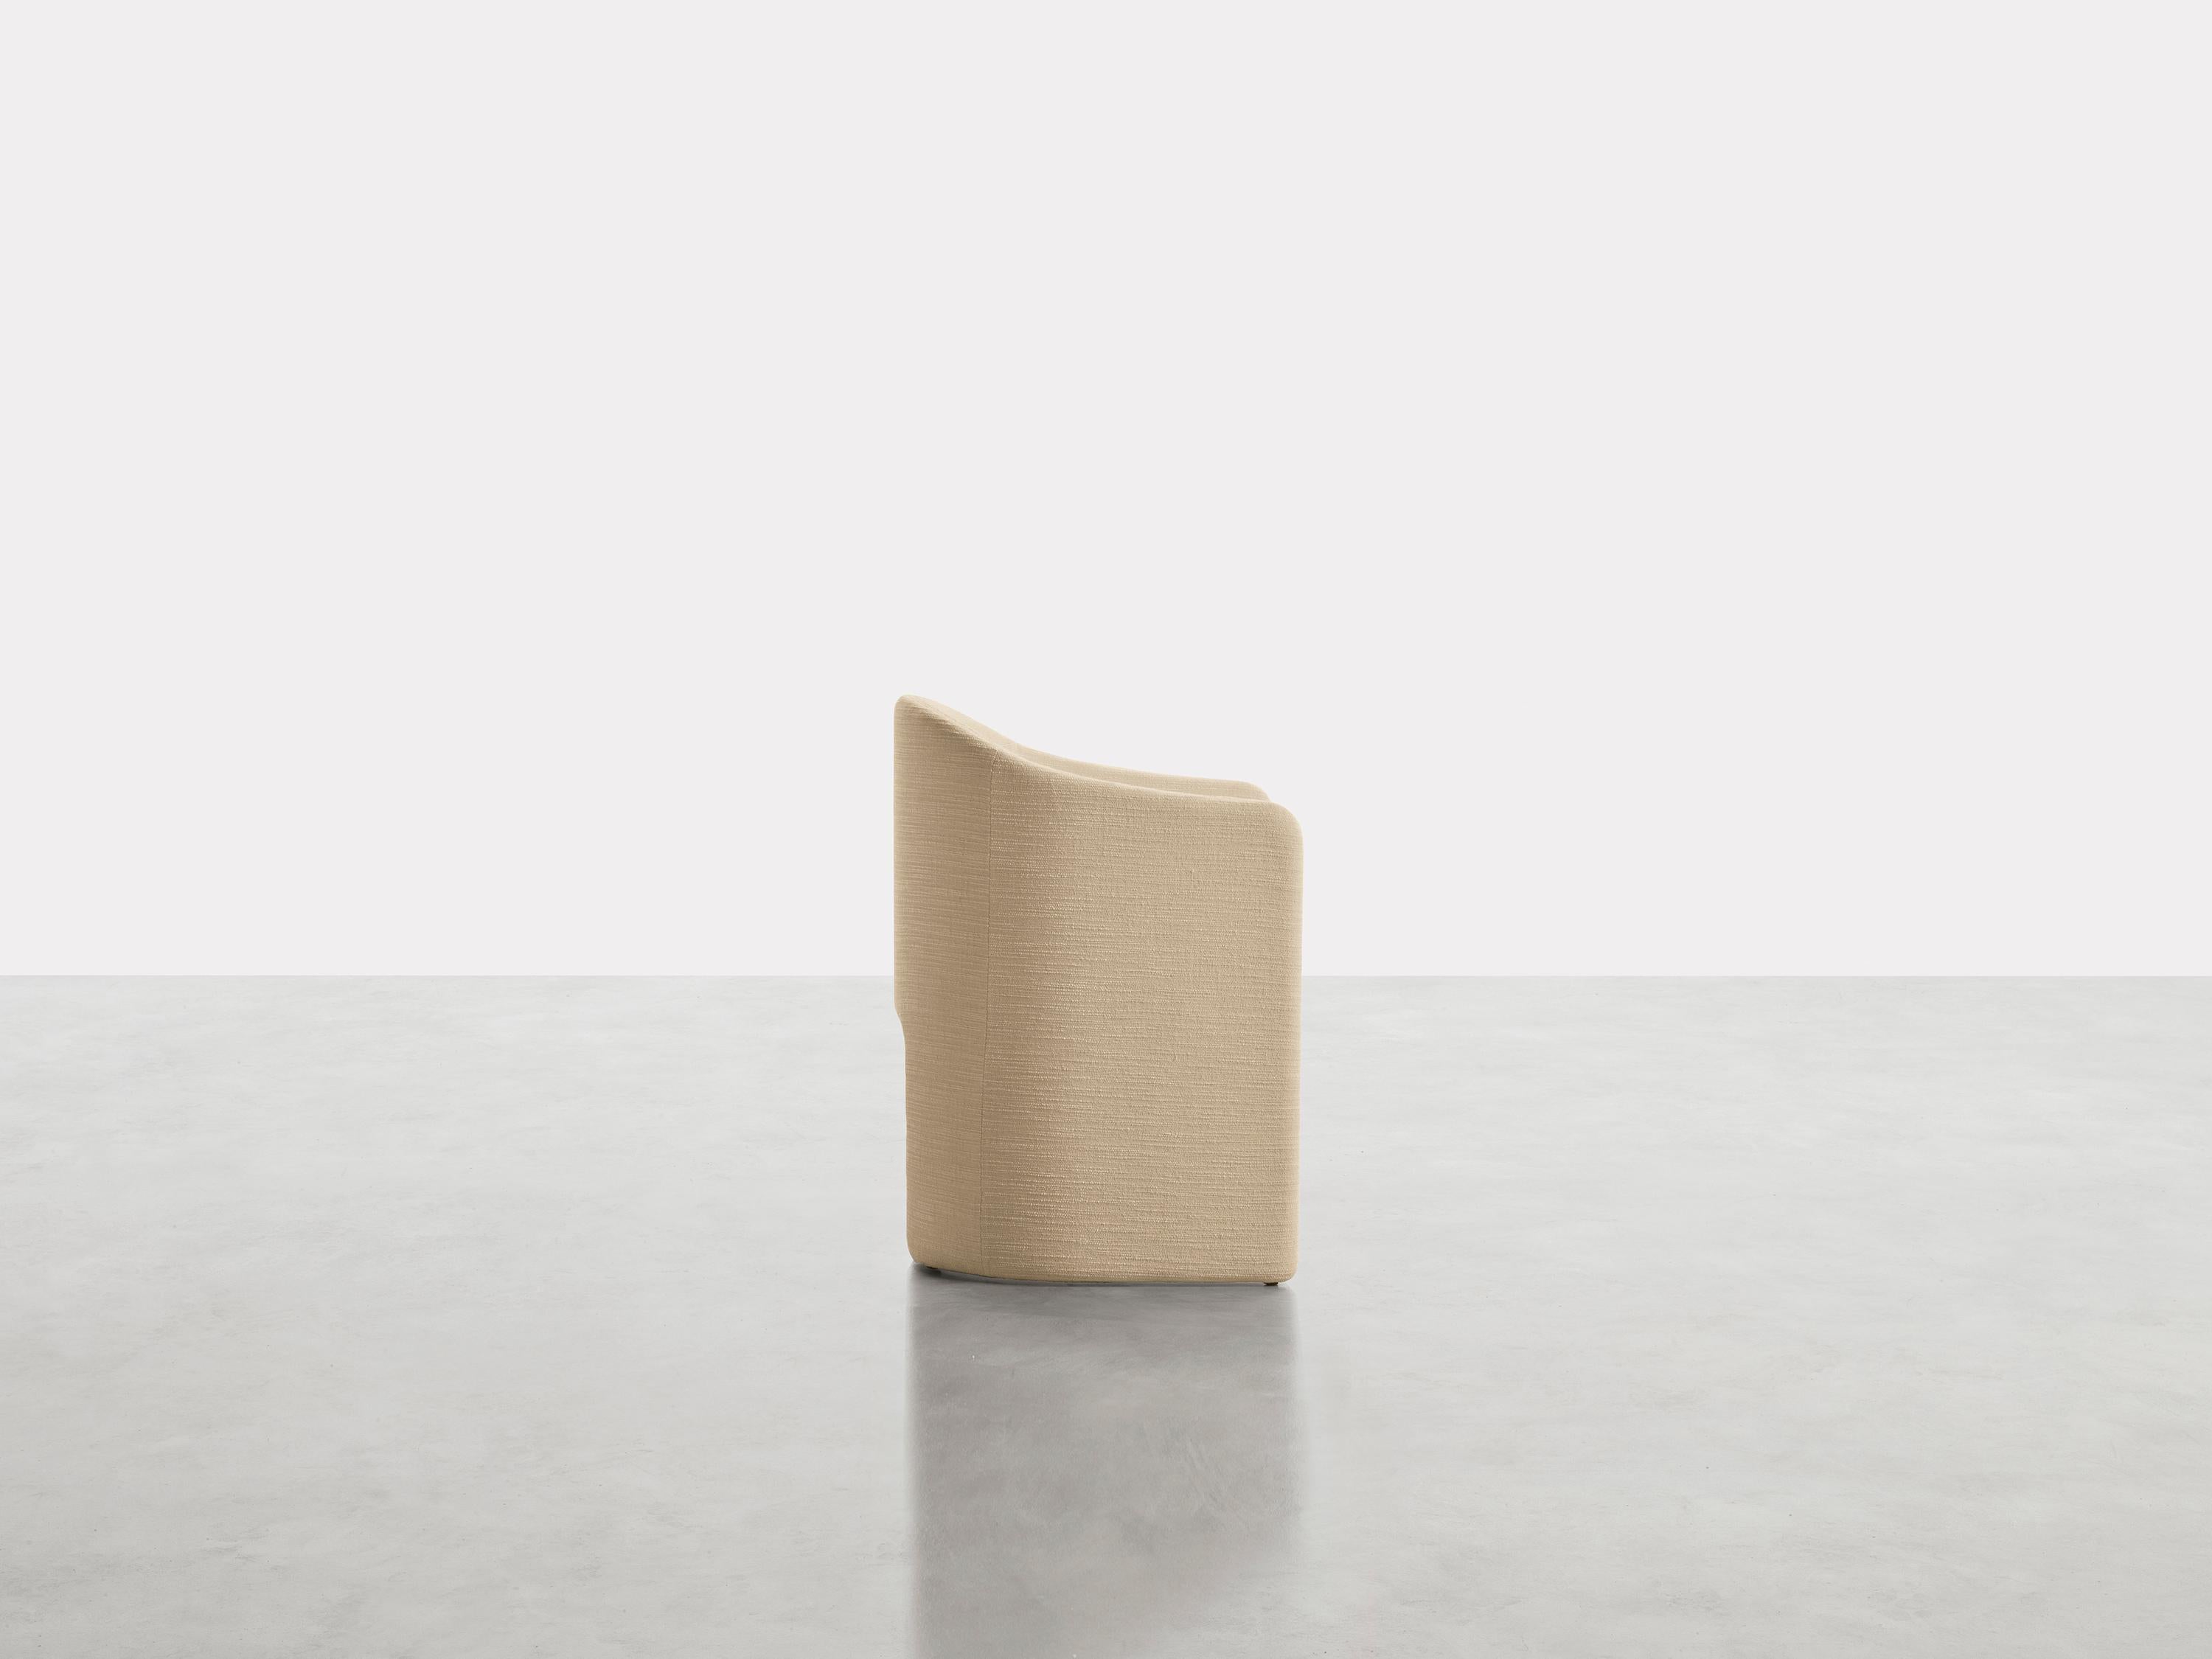 The seat harks back in form to the aesthetics of mid-century bourgeois furnishings. The singular cut in the
shell gives added character to a classic, composed elegance, as well as ensuring lightness and functionality.
Solid wood and curved plywood